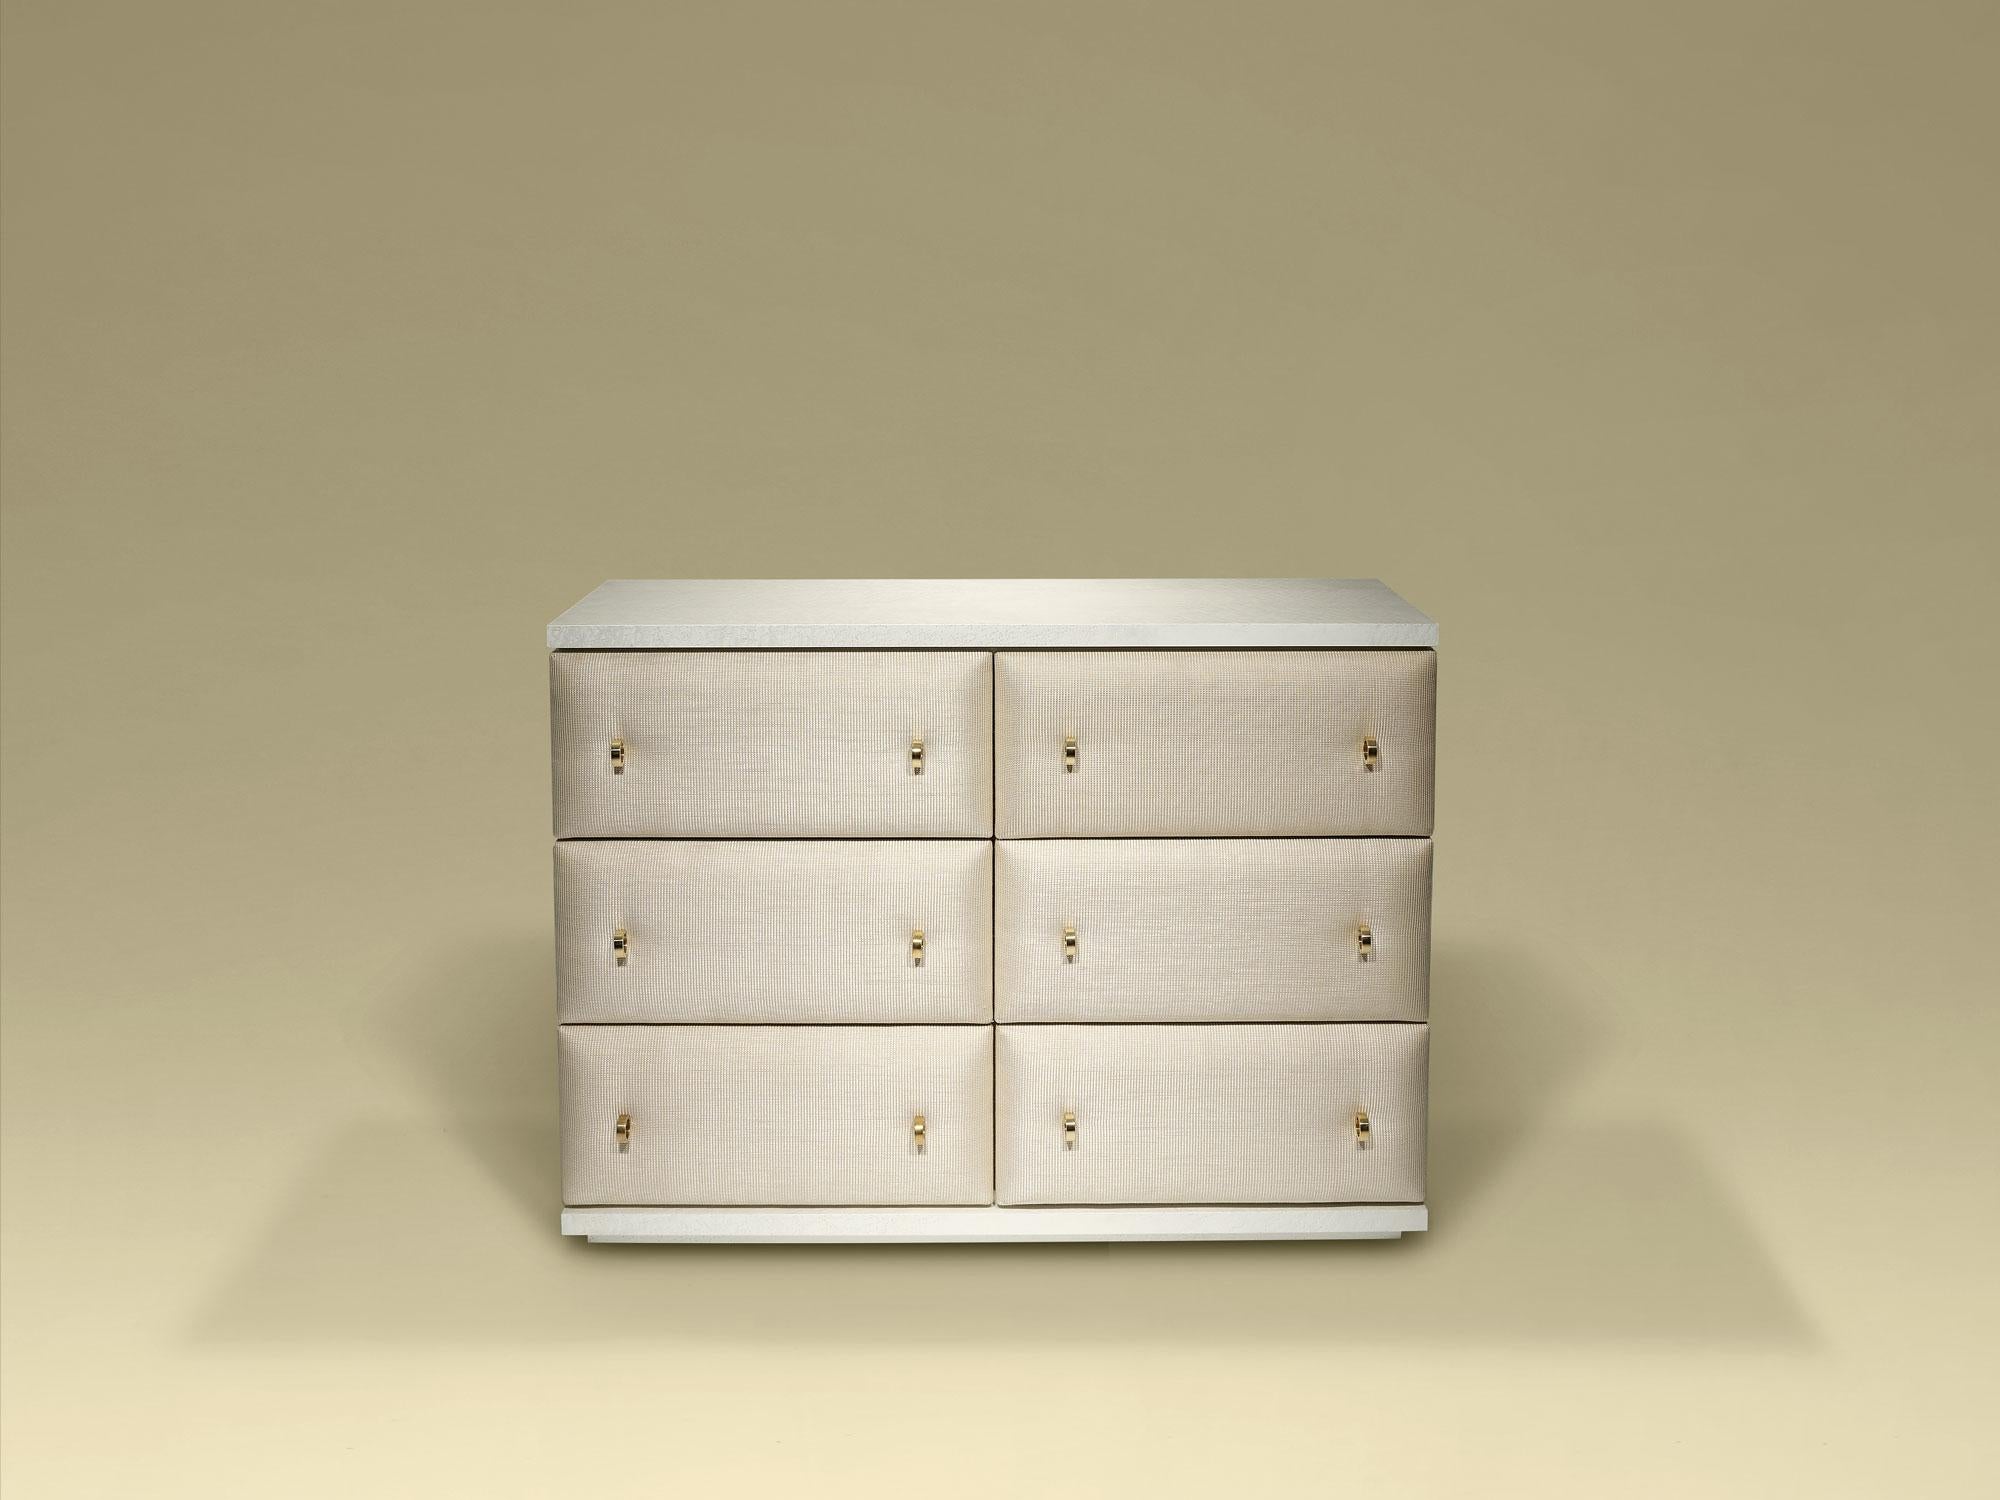 Chest of drawers in white partridge eye with drawers upholstery, gold knobs.

Bespoke / Customizable
Identical shapes with different sizes and finishings.
All RAL colors available. (Mate / Half Gloss / Gloss)